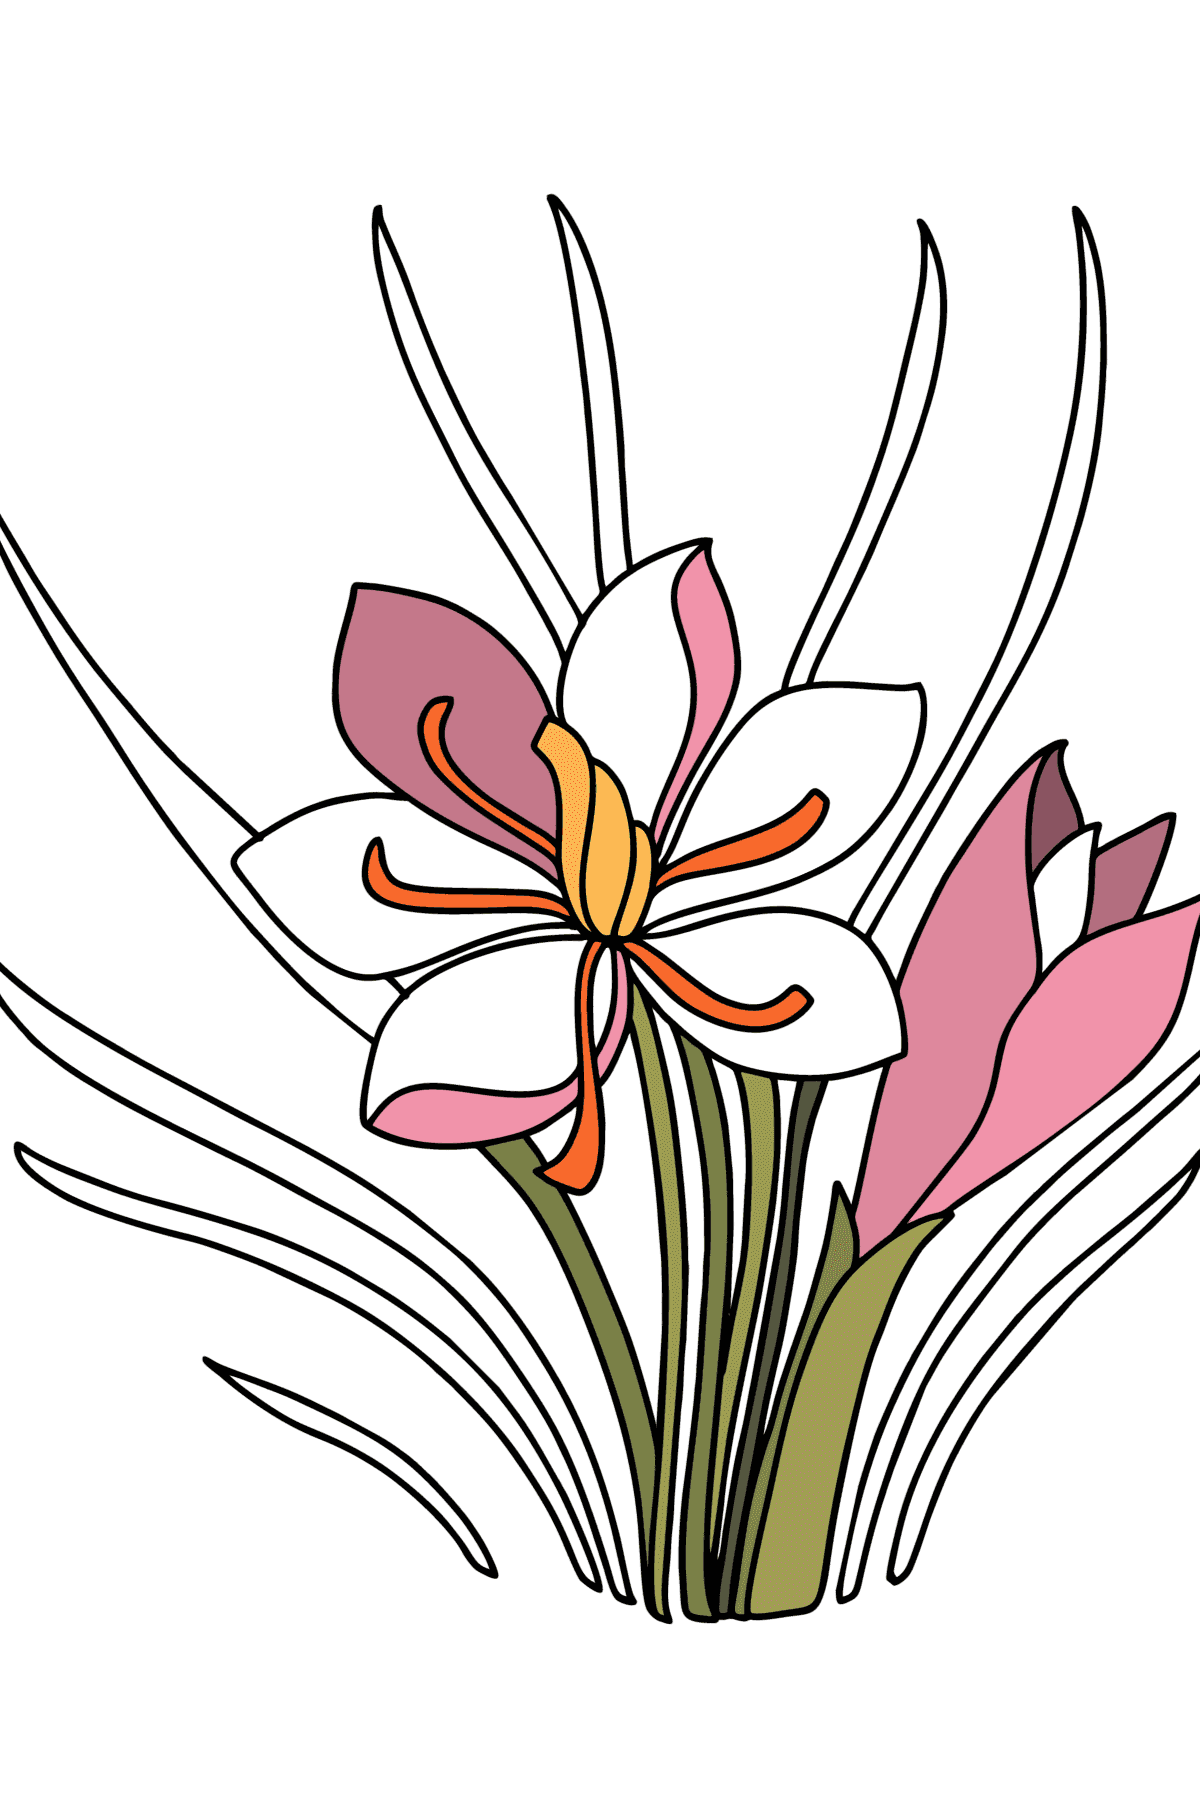 Crocus coloring page - Coloring Pages for Kids